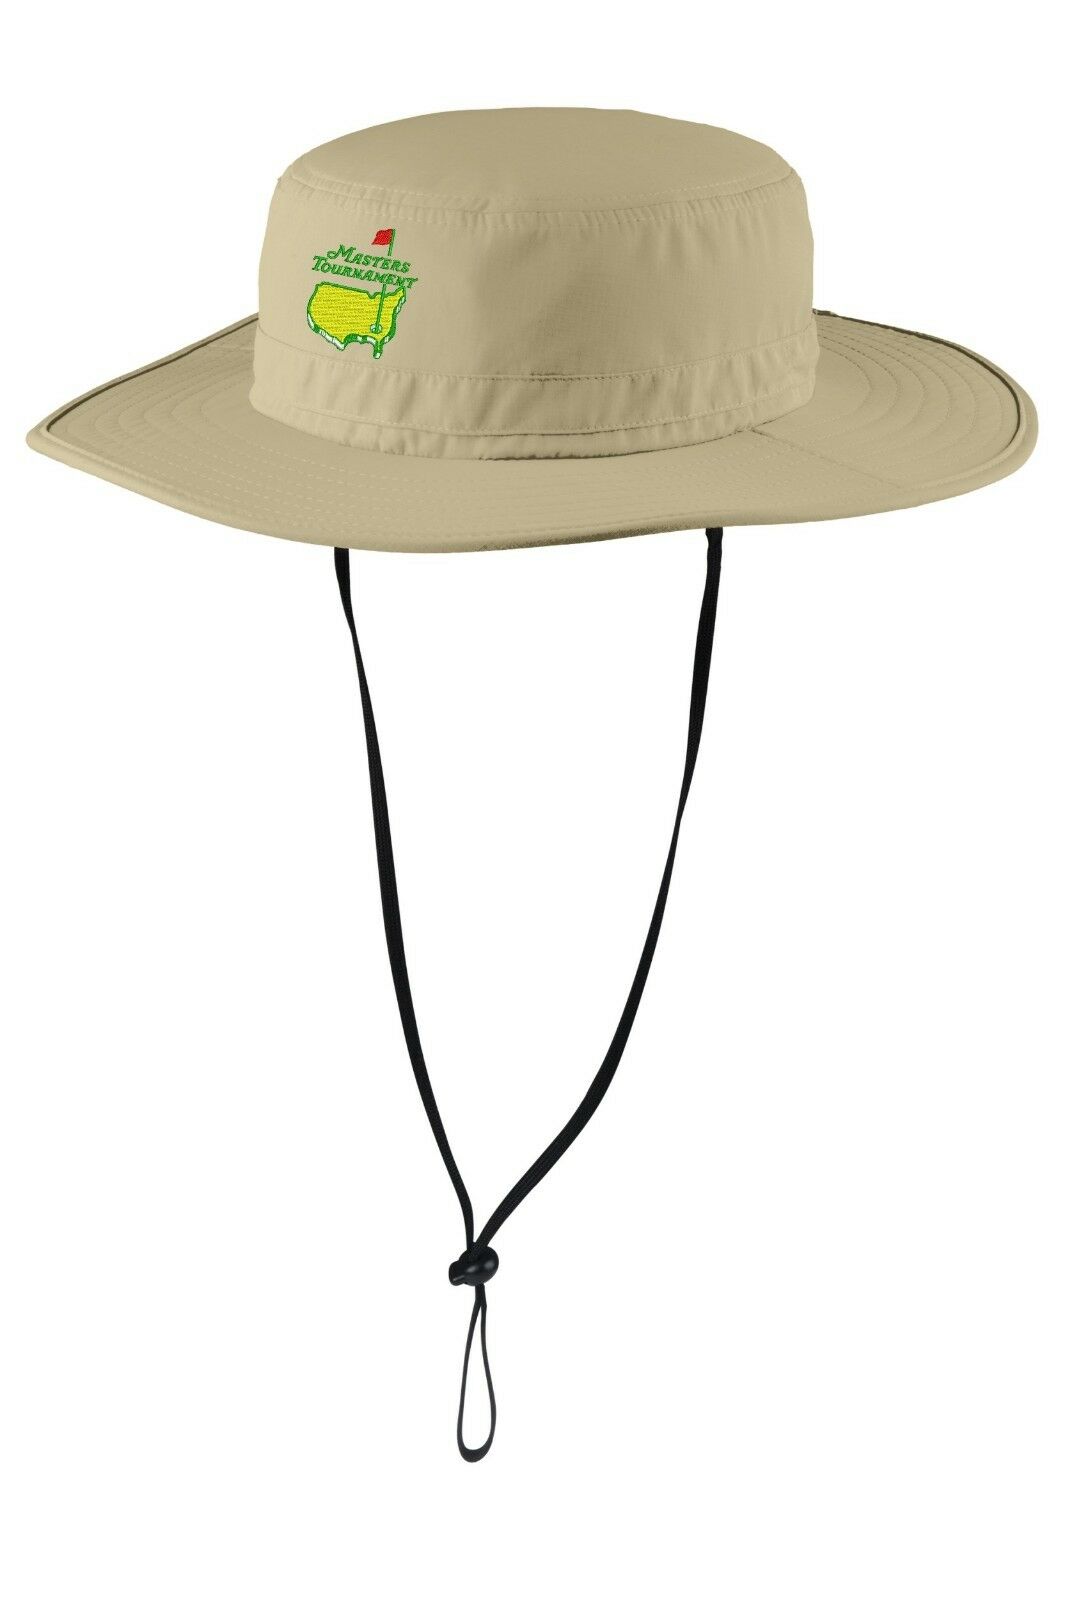 Us Masters Golf Tournament  Tour Bucket Hat With Rear Flap No Fly Zone